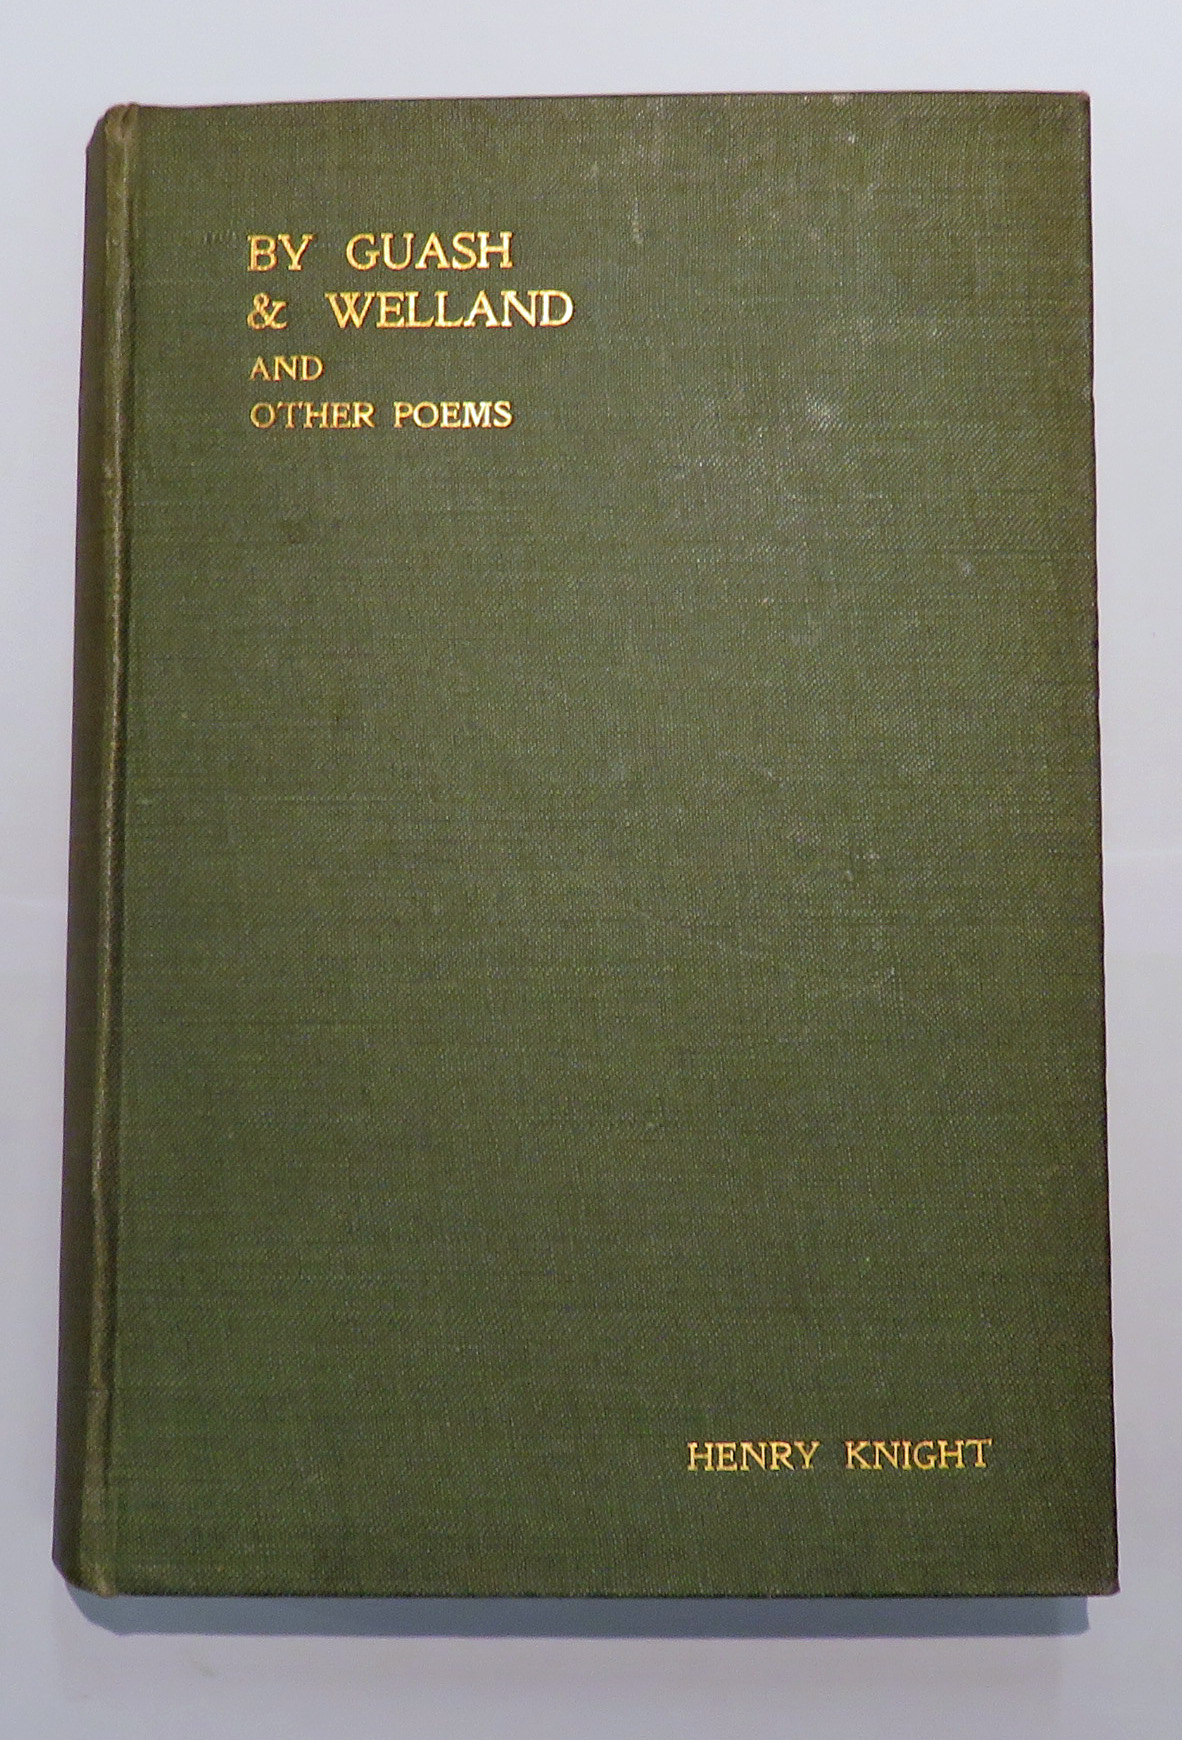 By Guash and Welland, and Other Poems